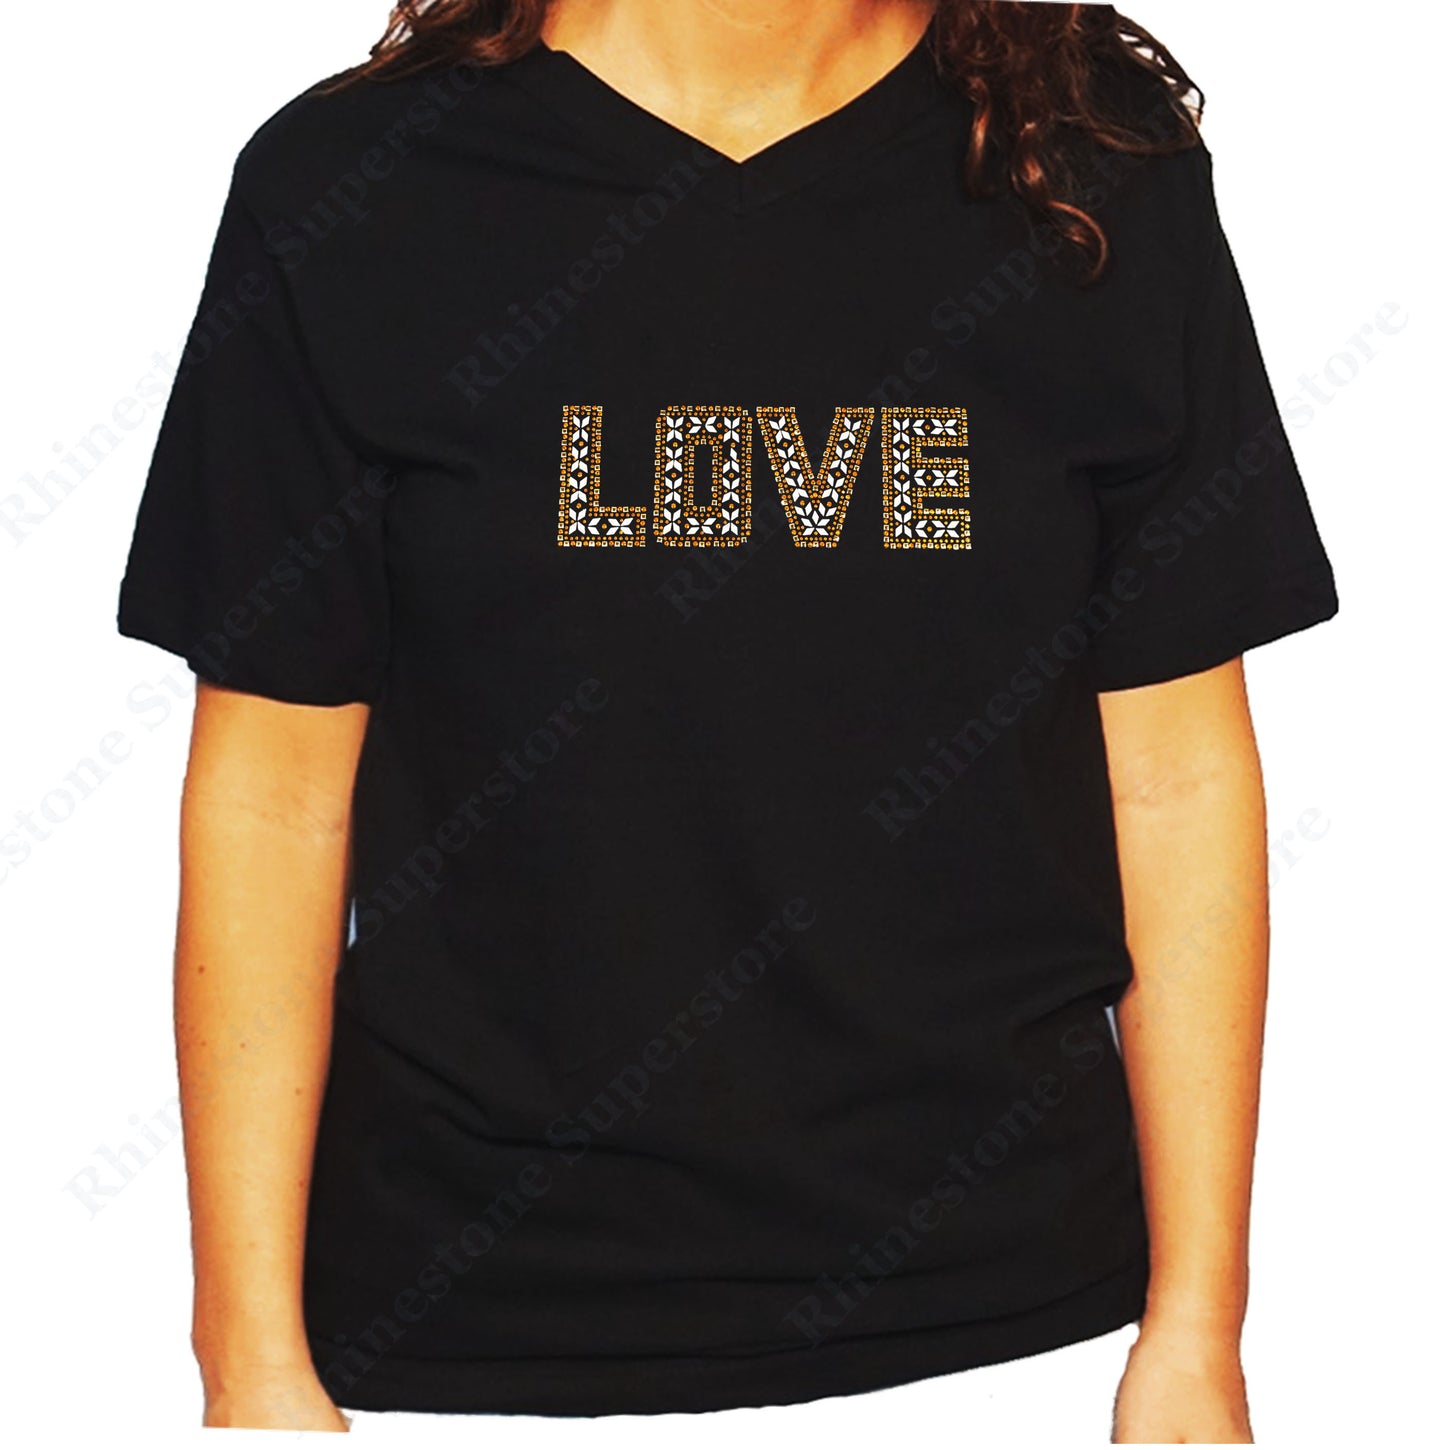 Women's / Unisex T-Shirt with Gold Love in Rhinestuds